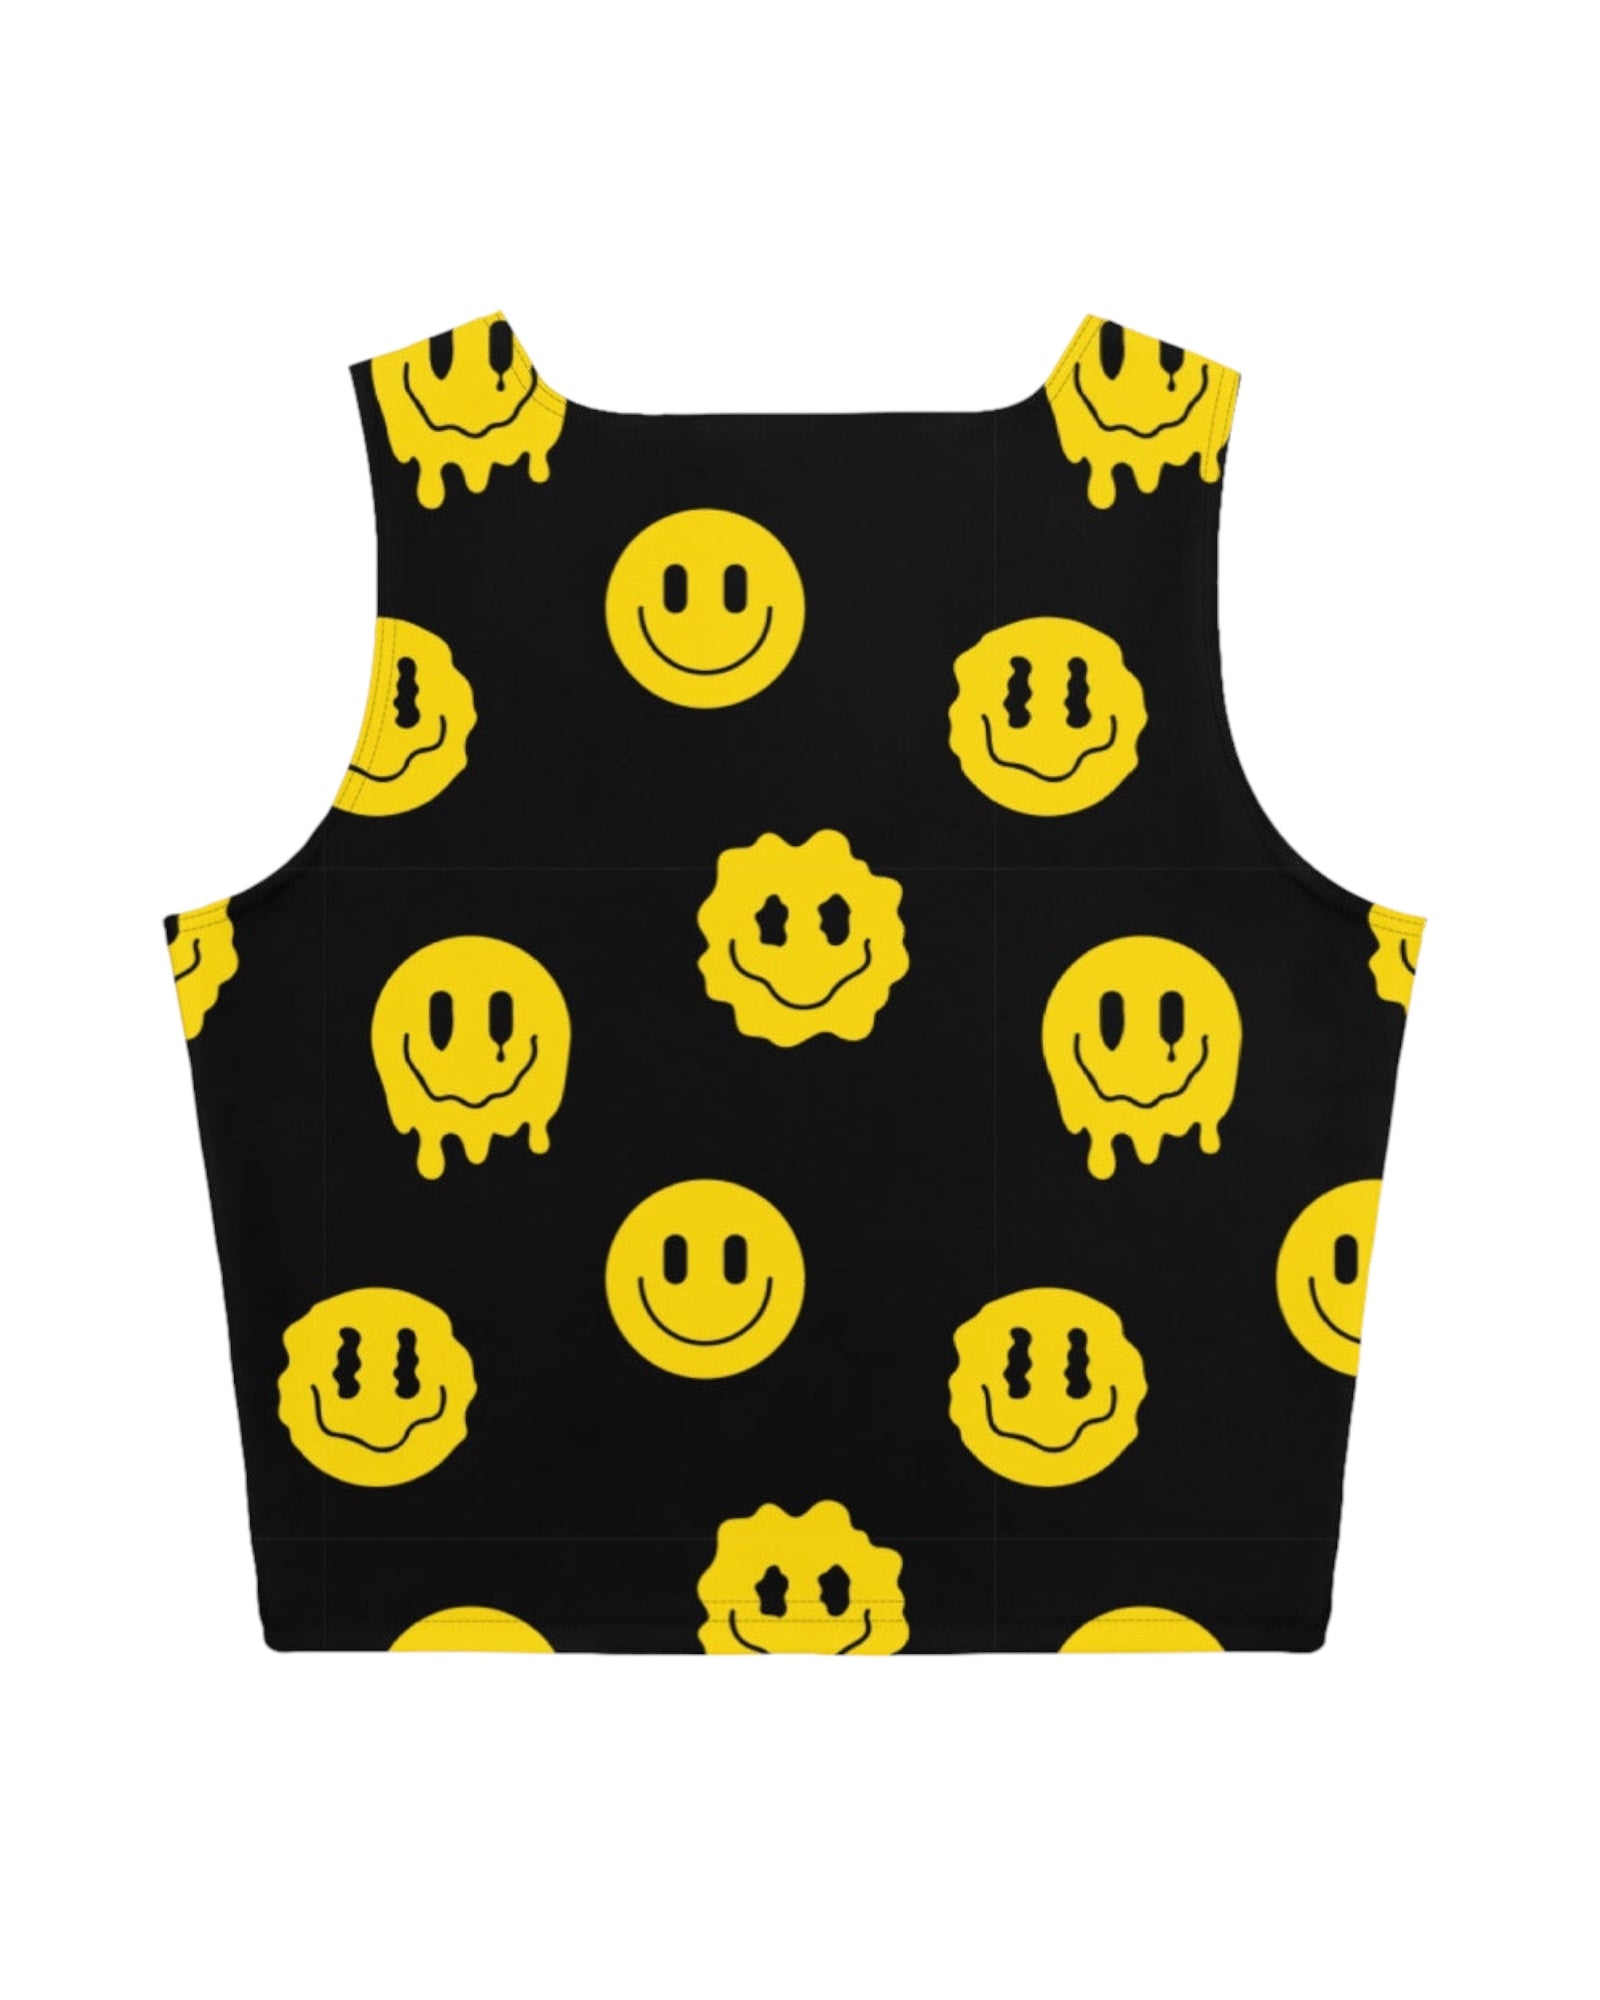 Back view of Trippie Crop Top - Patterned with yellow smiley faces on black, showcasing the back design of this crop top for rave wear.